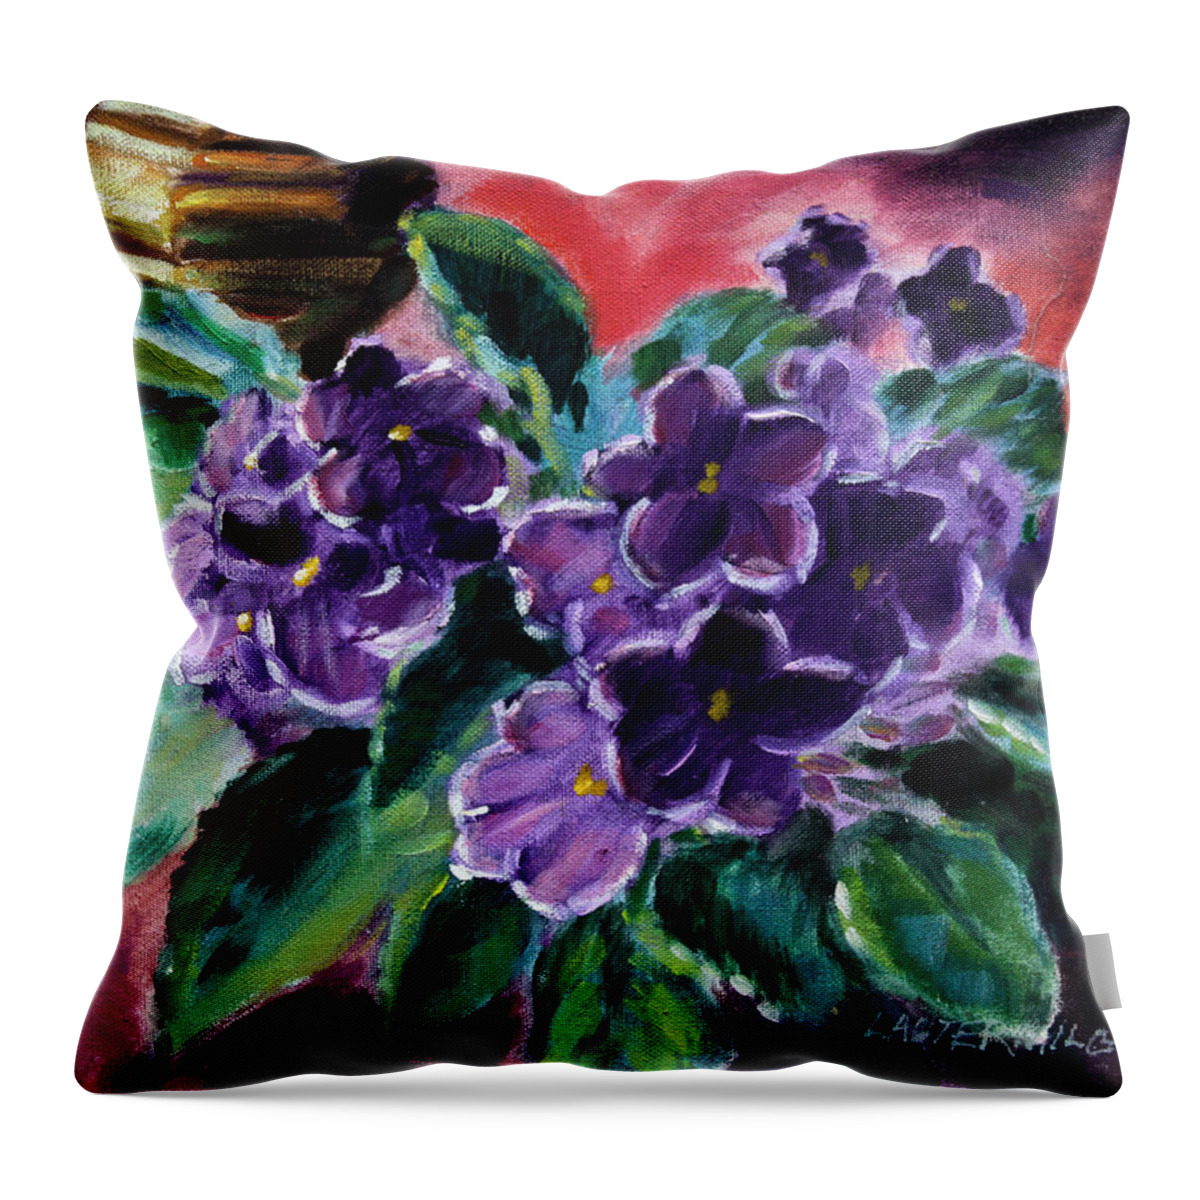 African Violets Throw Pillow featuring the painting African Violets by John Lautermilch